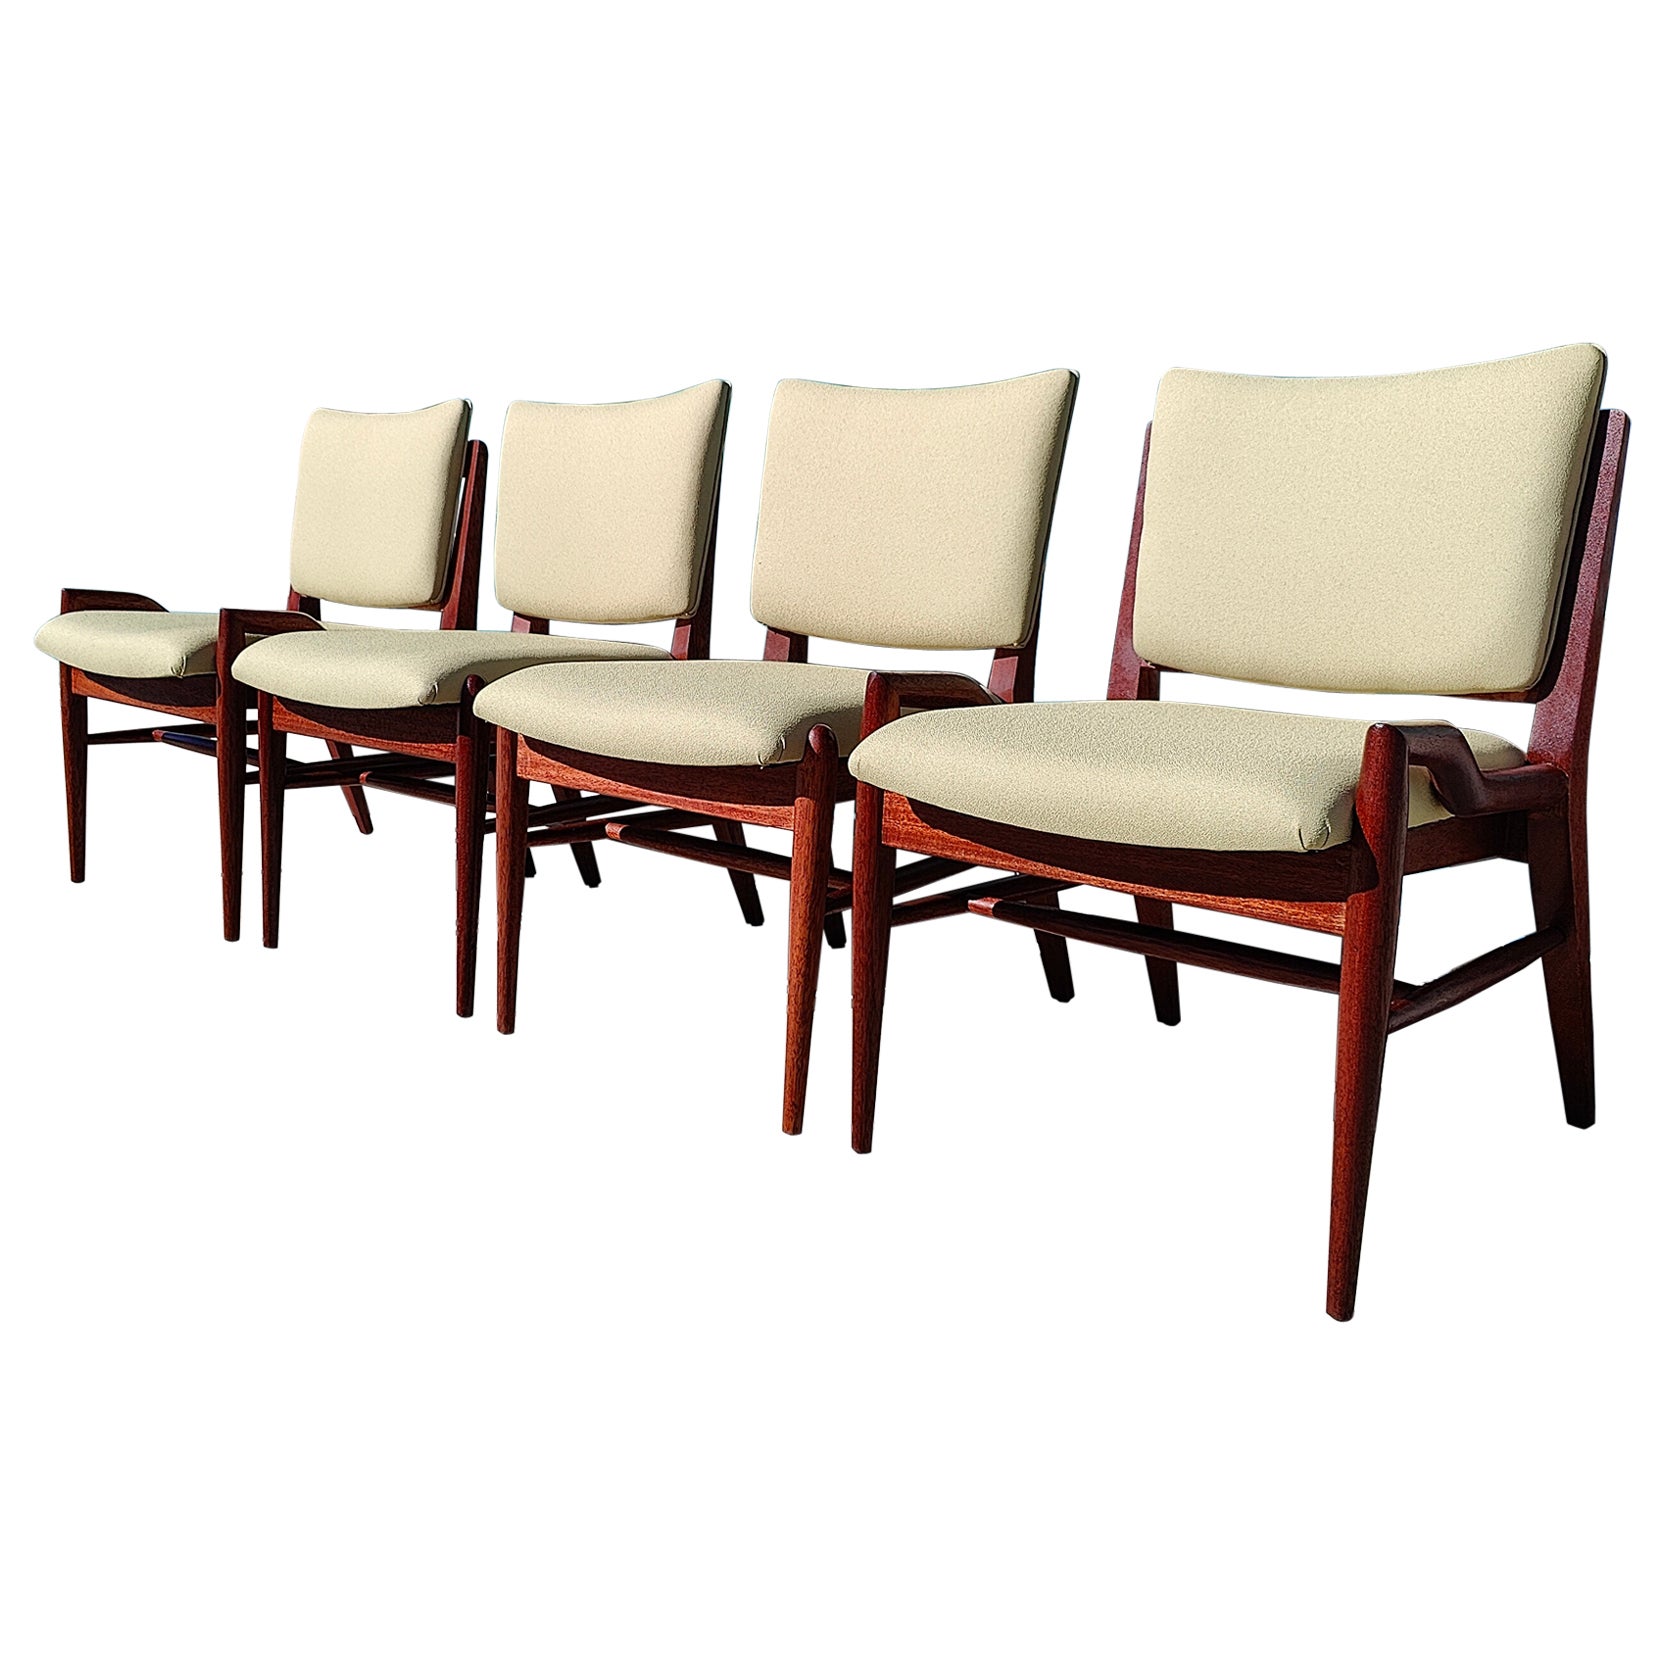 Vintage Mid-Century Modern Mahogony Chairs by Brown Saltman